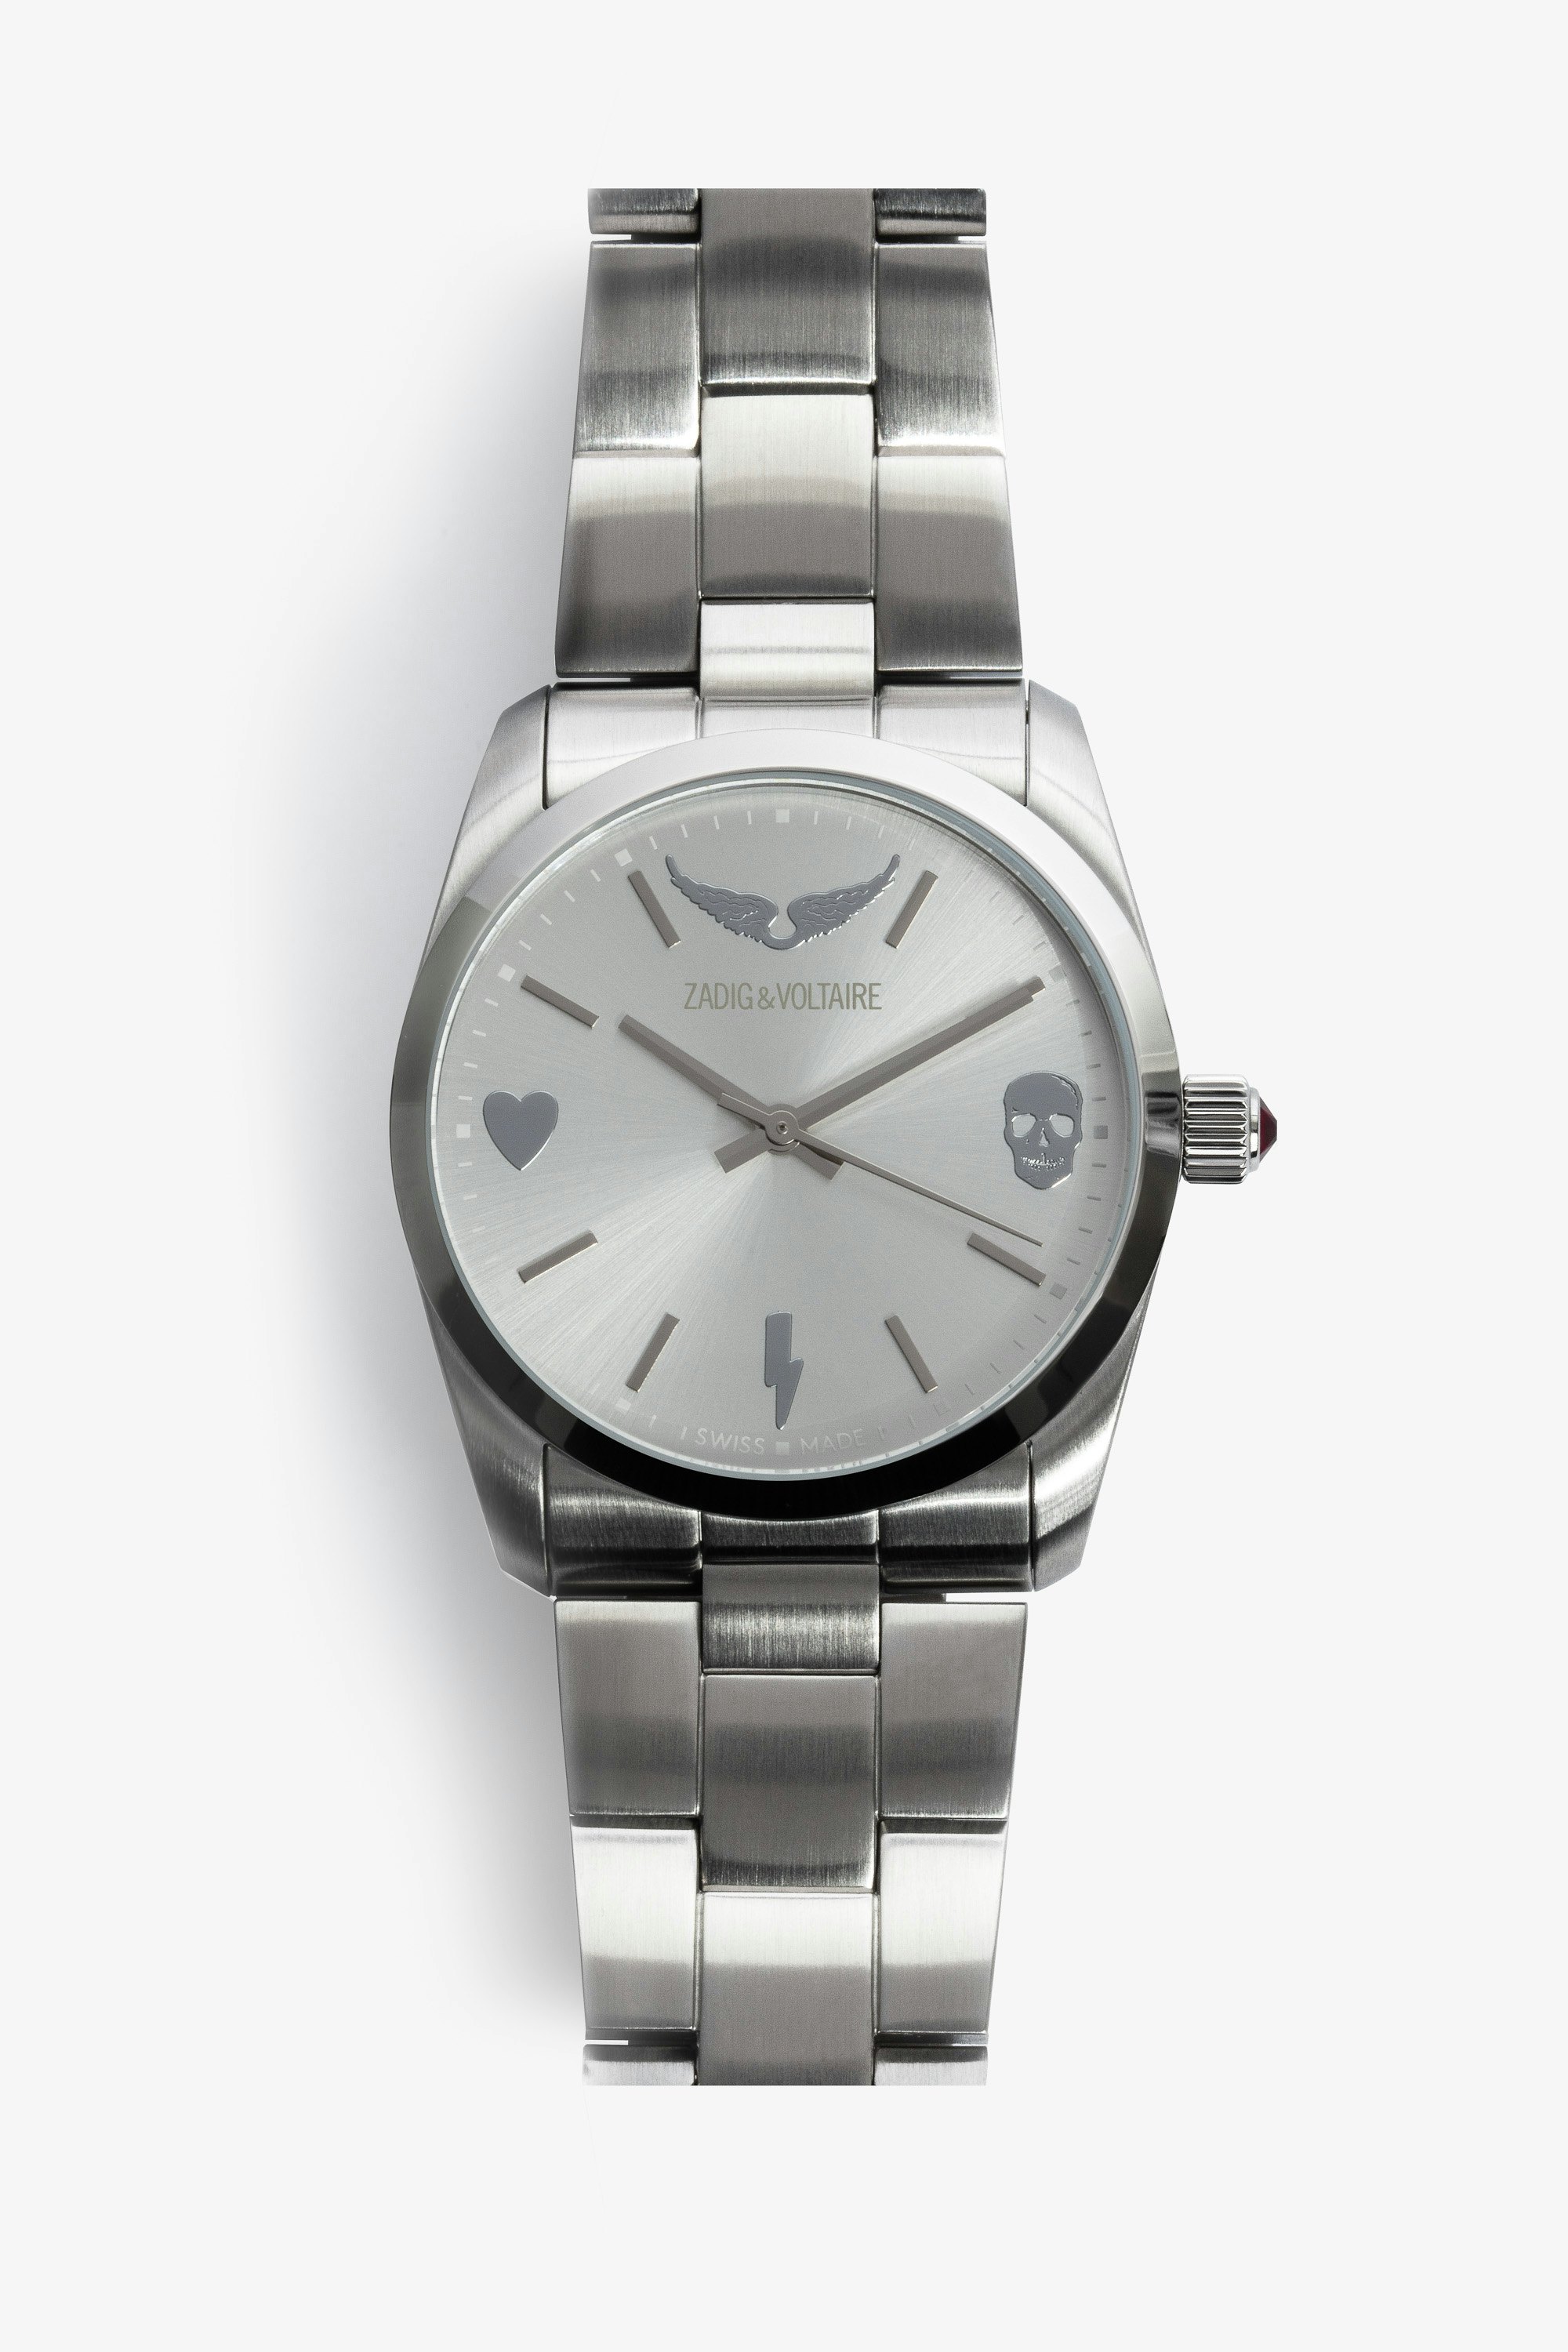 Time2Love Watch - Women's stainless steel watch with silver face